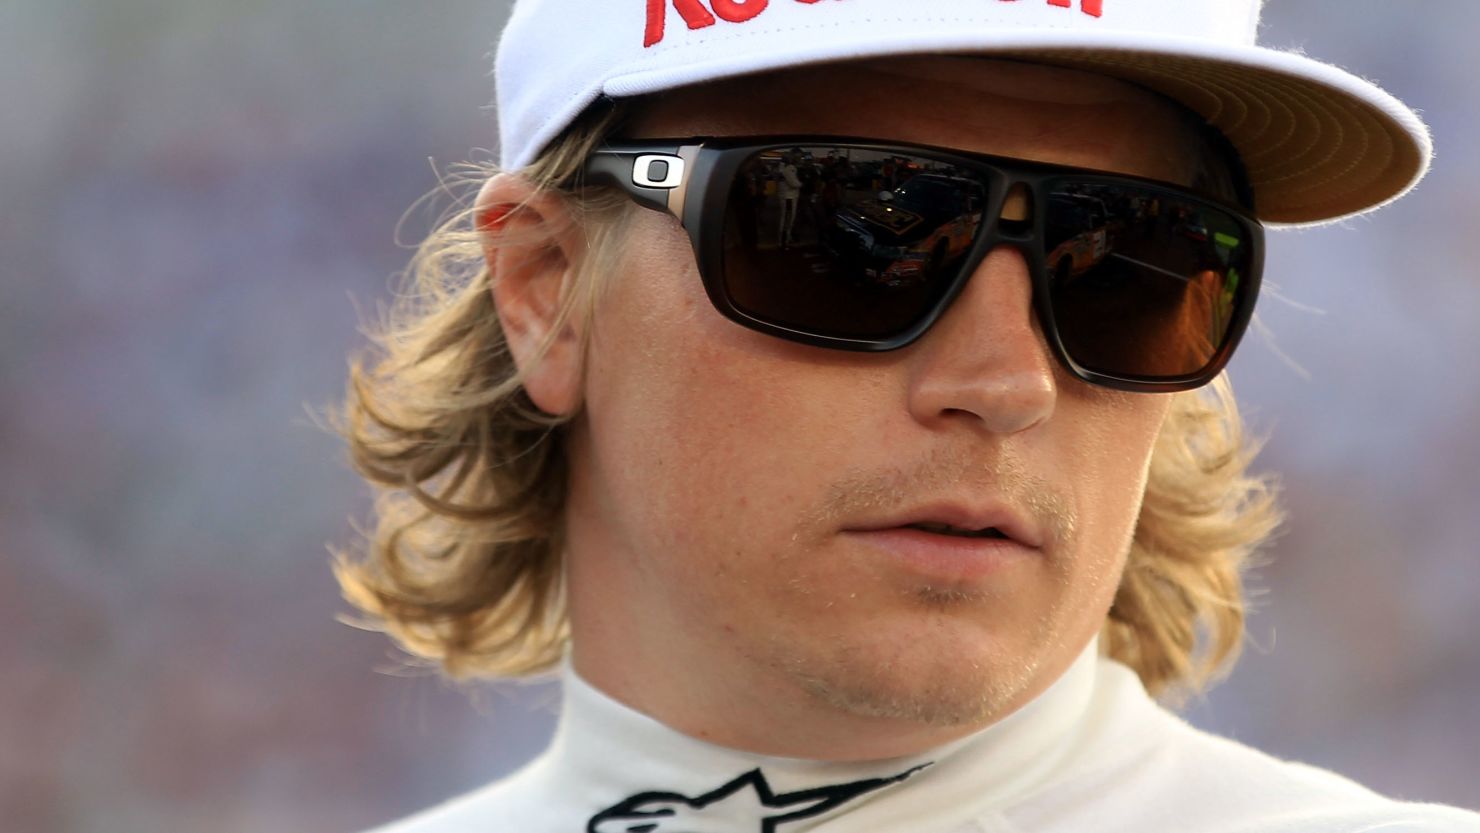 Kimi Raikkonen departed the ranks of F1 drivers in 2009 to race in rally and NASCAR events.